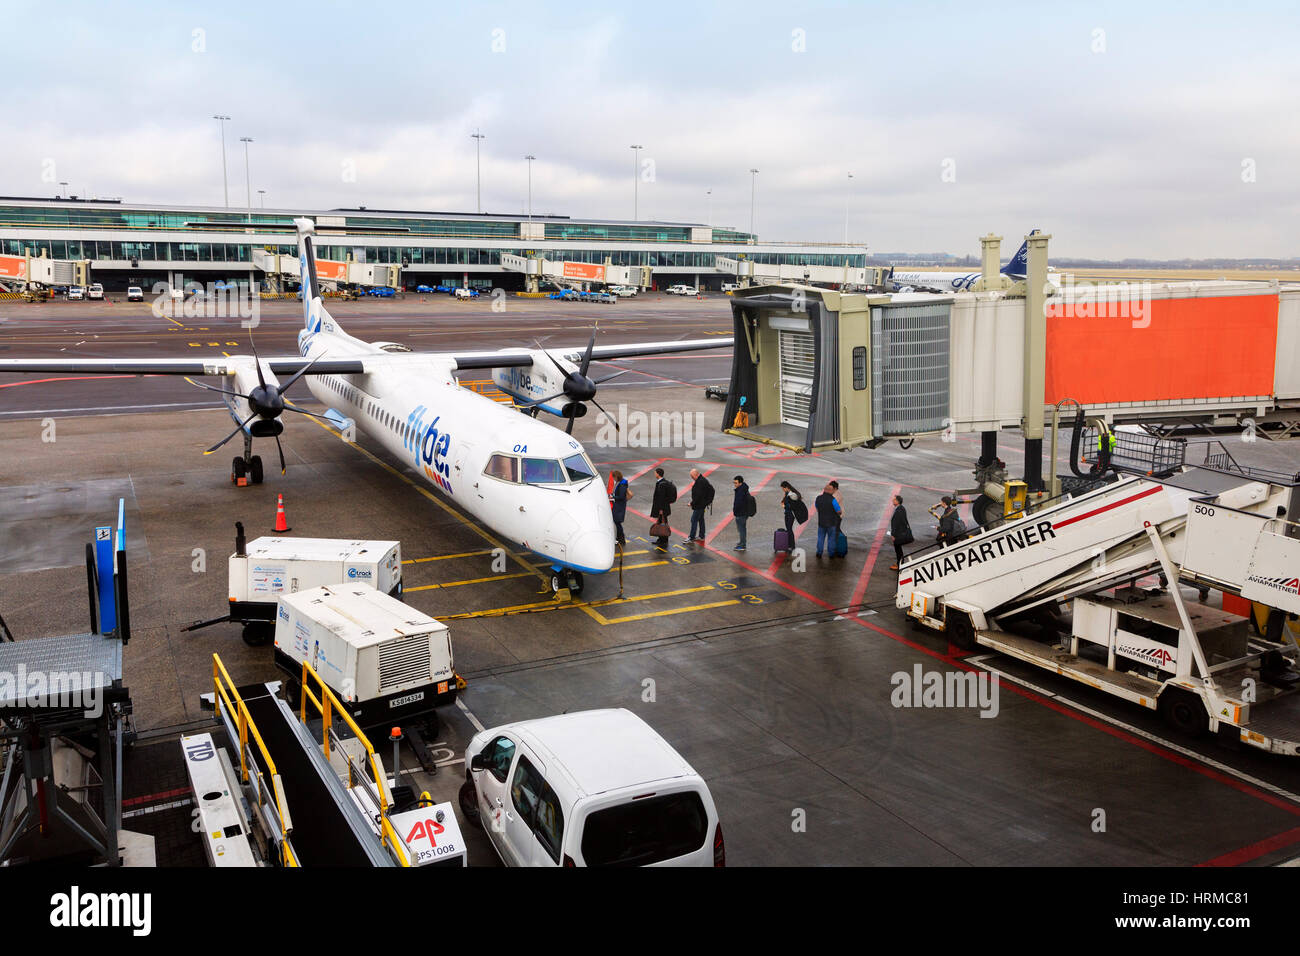 Passengers boarding a Flybe plane at Amsterdam Schipol airport, Holland Stock Photo